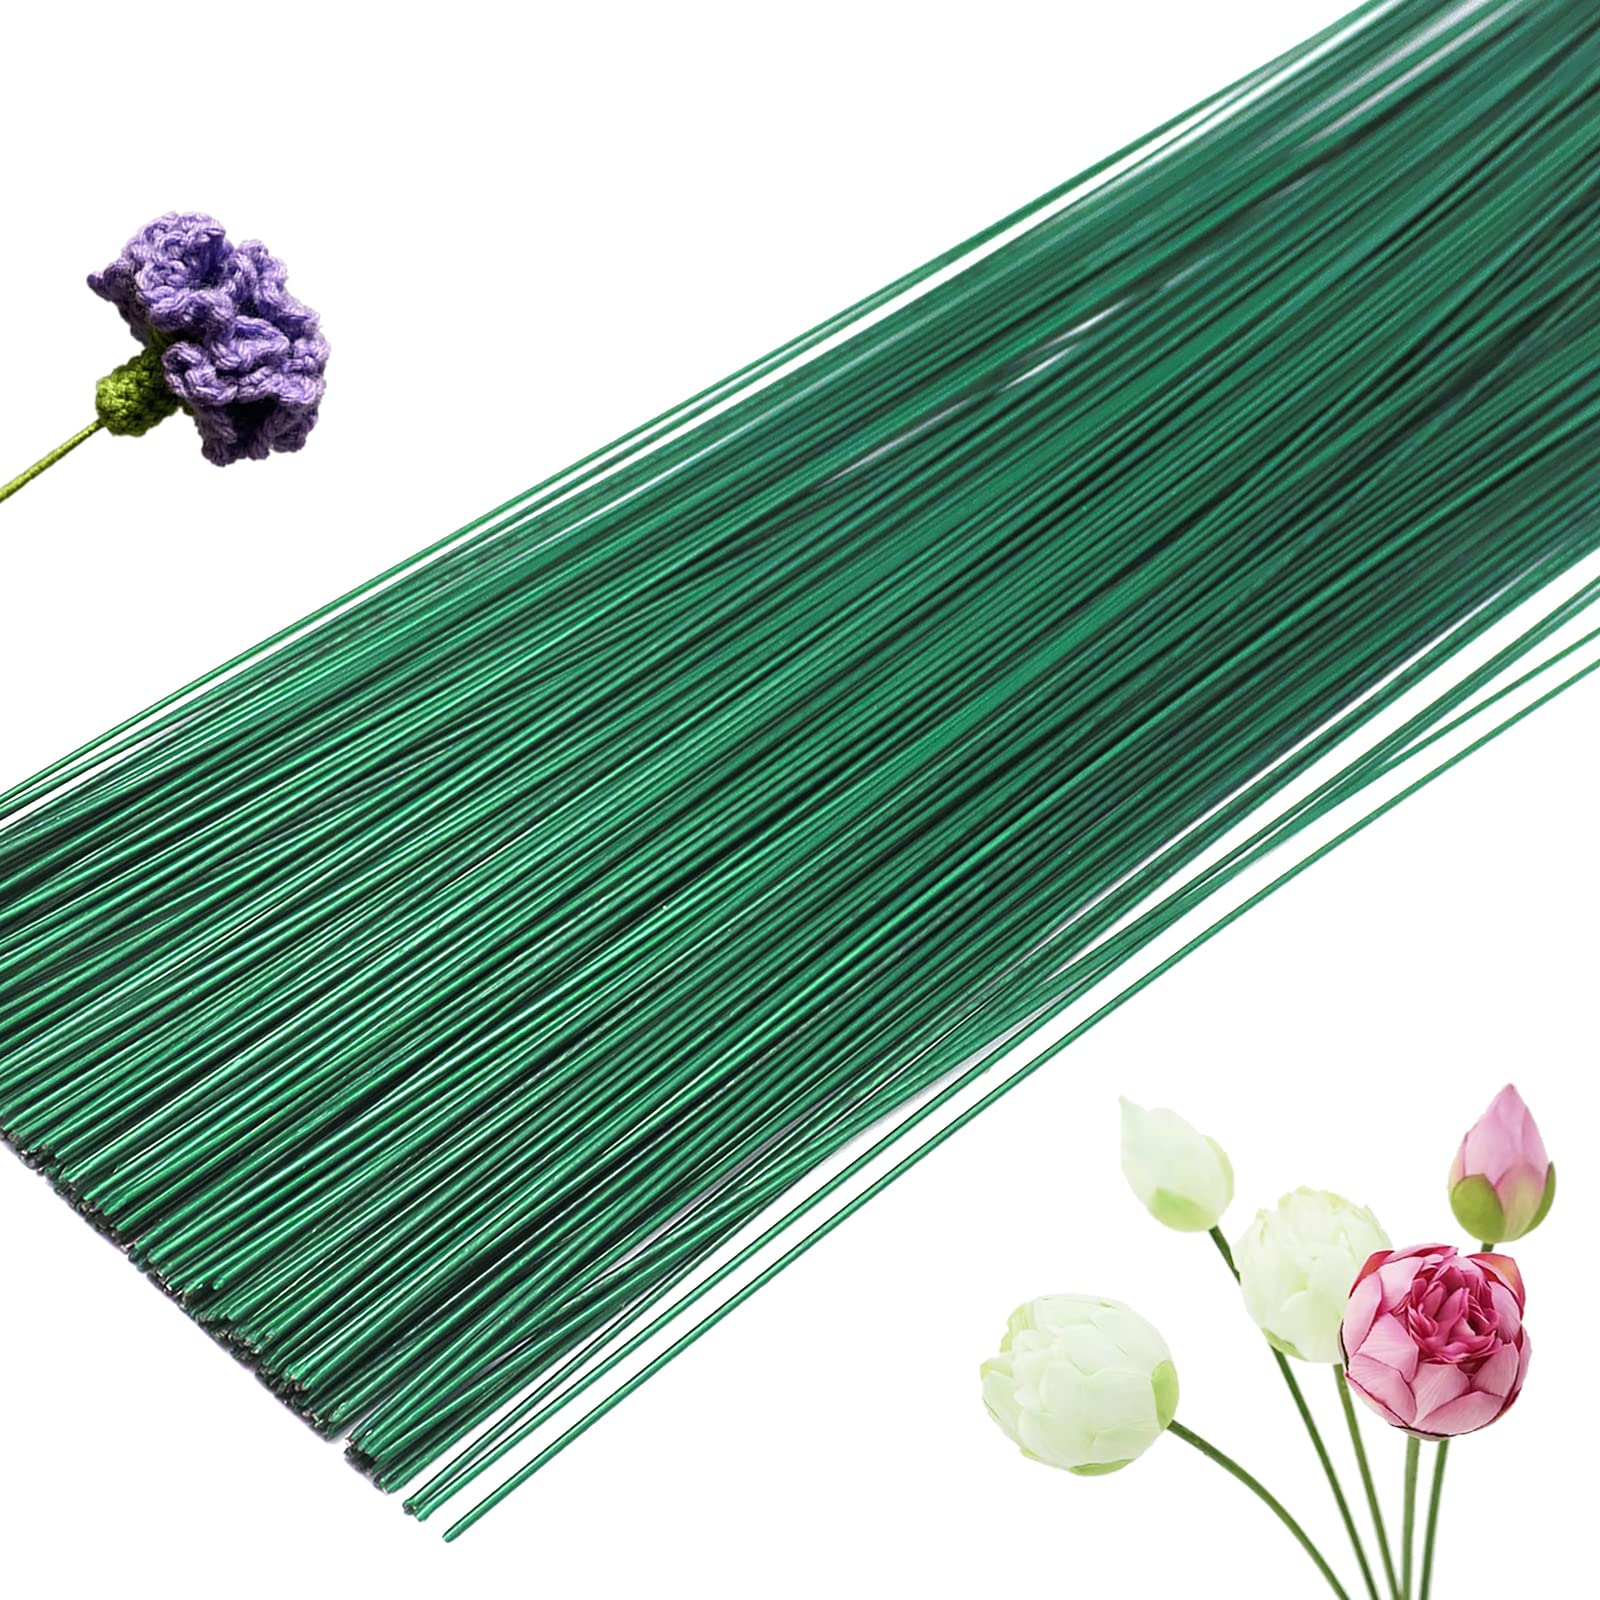 Hamiggaa 200 Pcs Floral Flower Stem Wire 16 Inch 22 Gauge Flower Paper  Wrapped Wire Green Crafting Floral Stem for Flower Arrangements DIY  Bouquent Stem Wrapping and Crafts